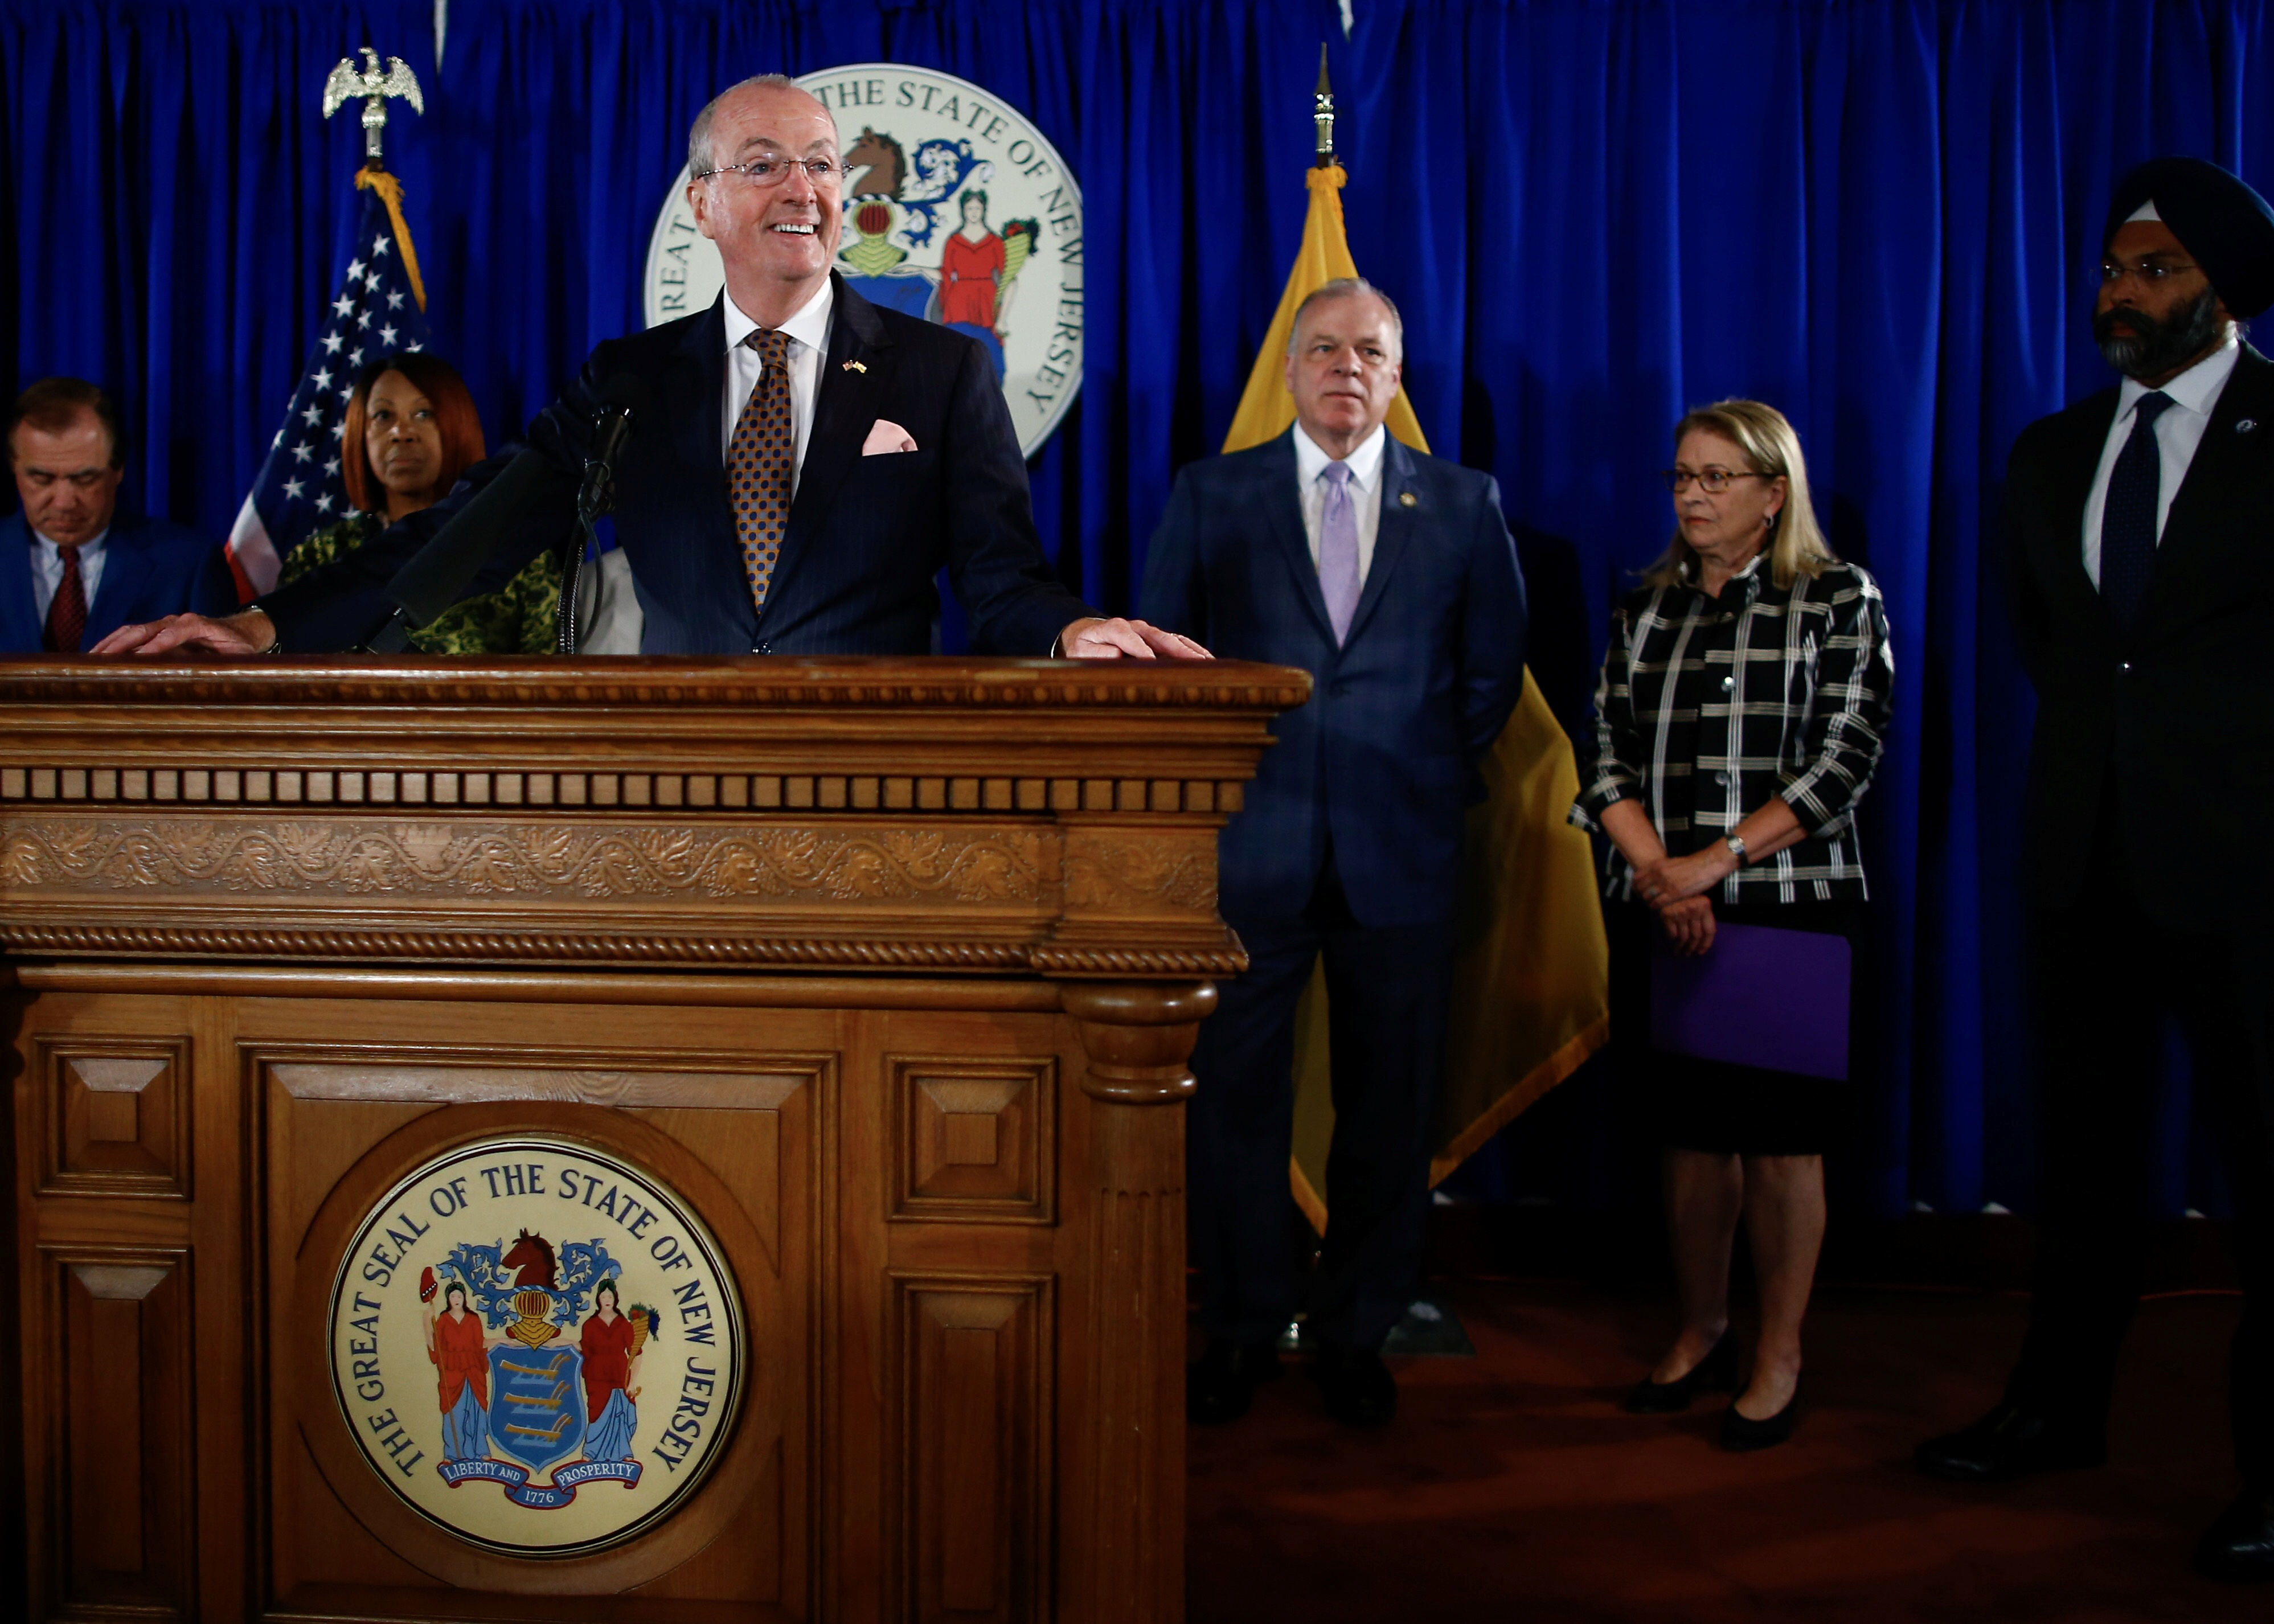 New Jersey Governor Murphy speaks about electronic smoking products during a news conference in Trenton, New Jersey